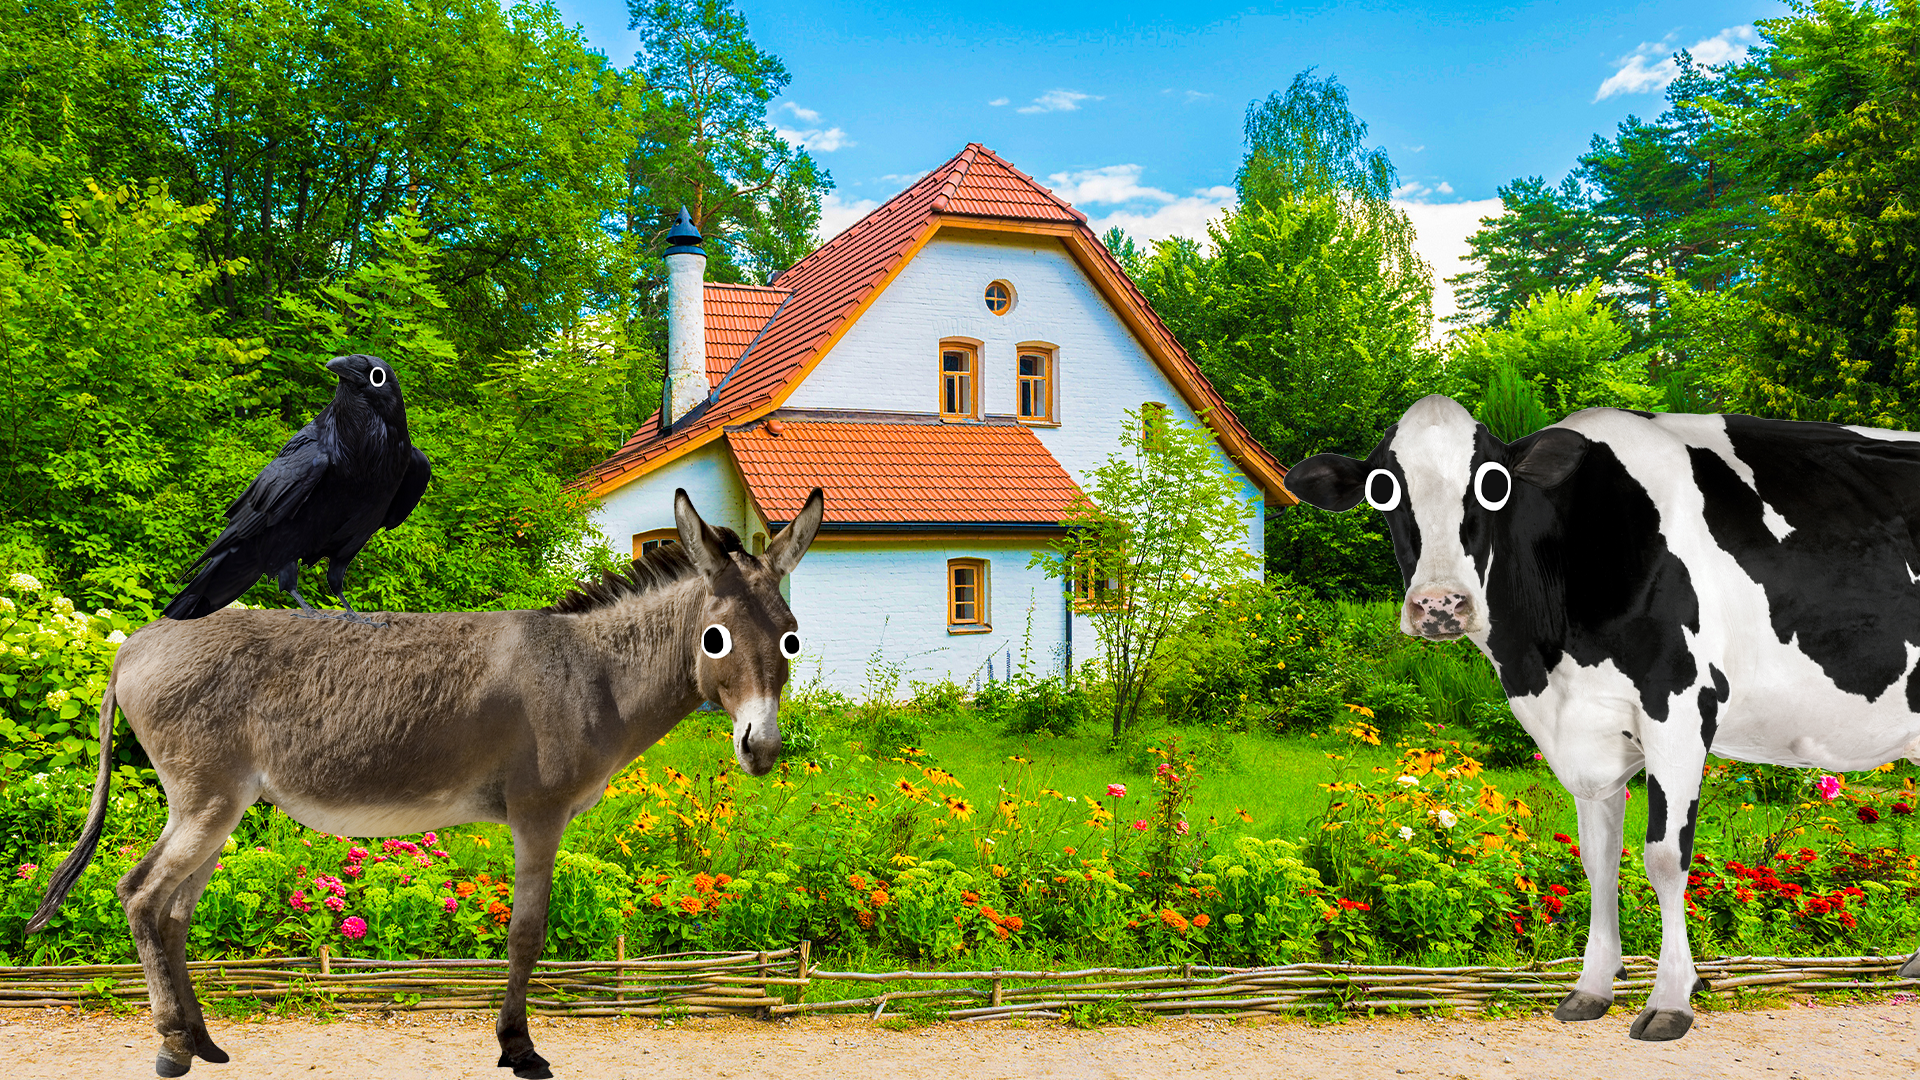 A Swiss style home being looked at by a donkey and a cow